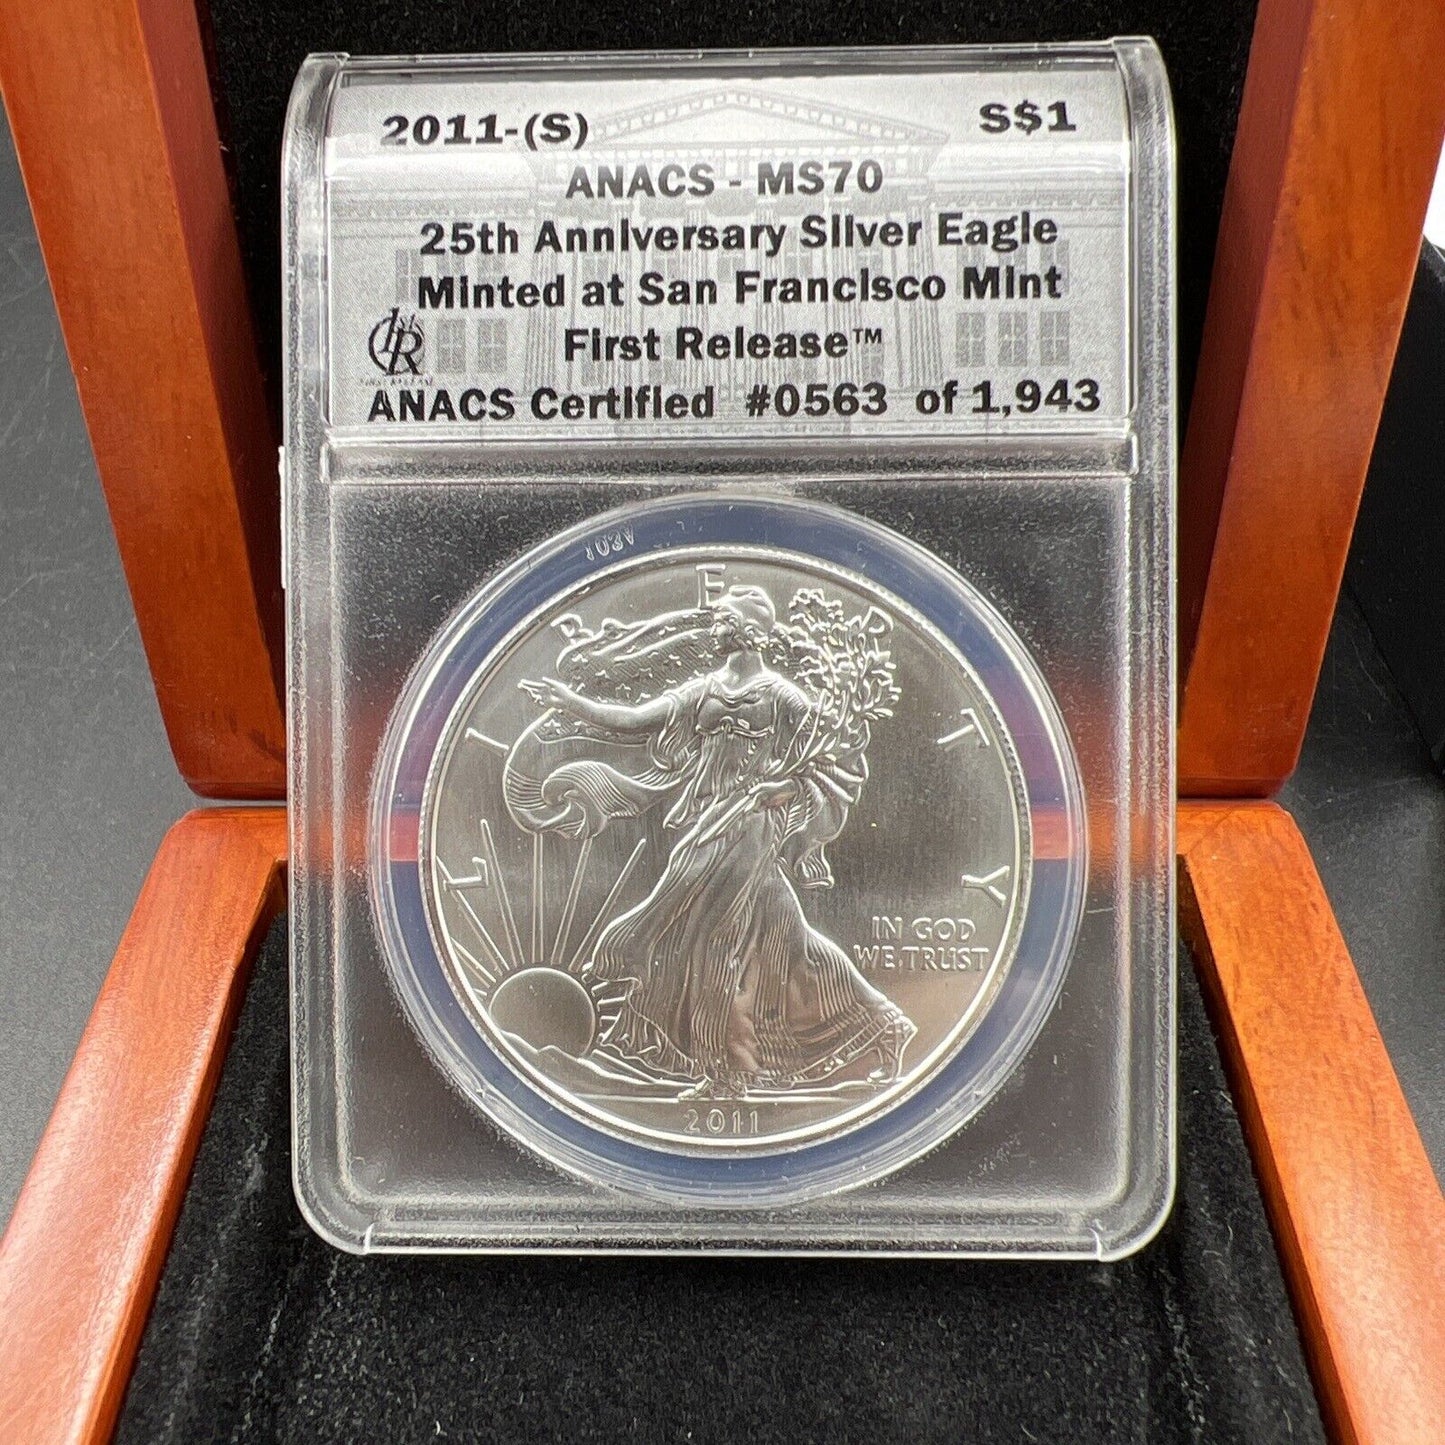 2011 S American 1oz Silver Eagle ANACS MS70 25th Anniversary ASE in Display #563